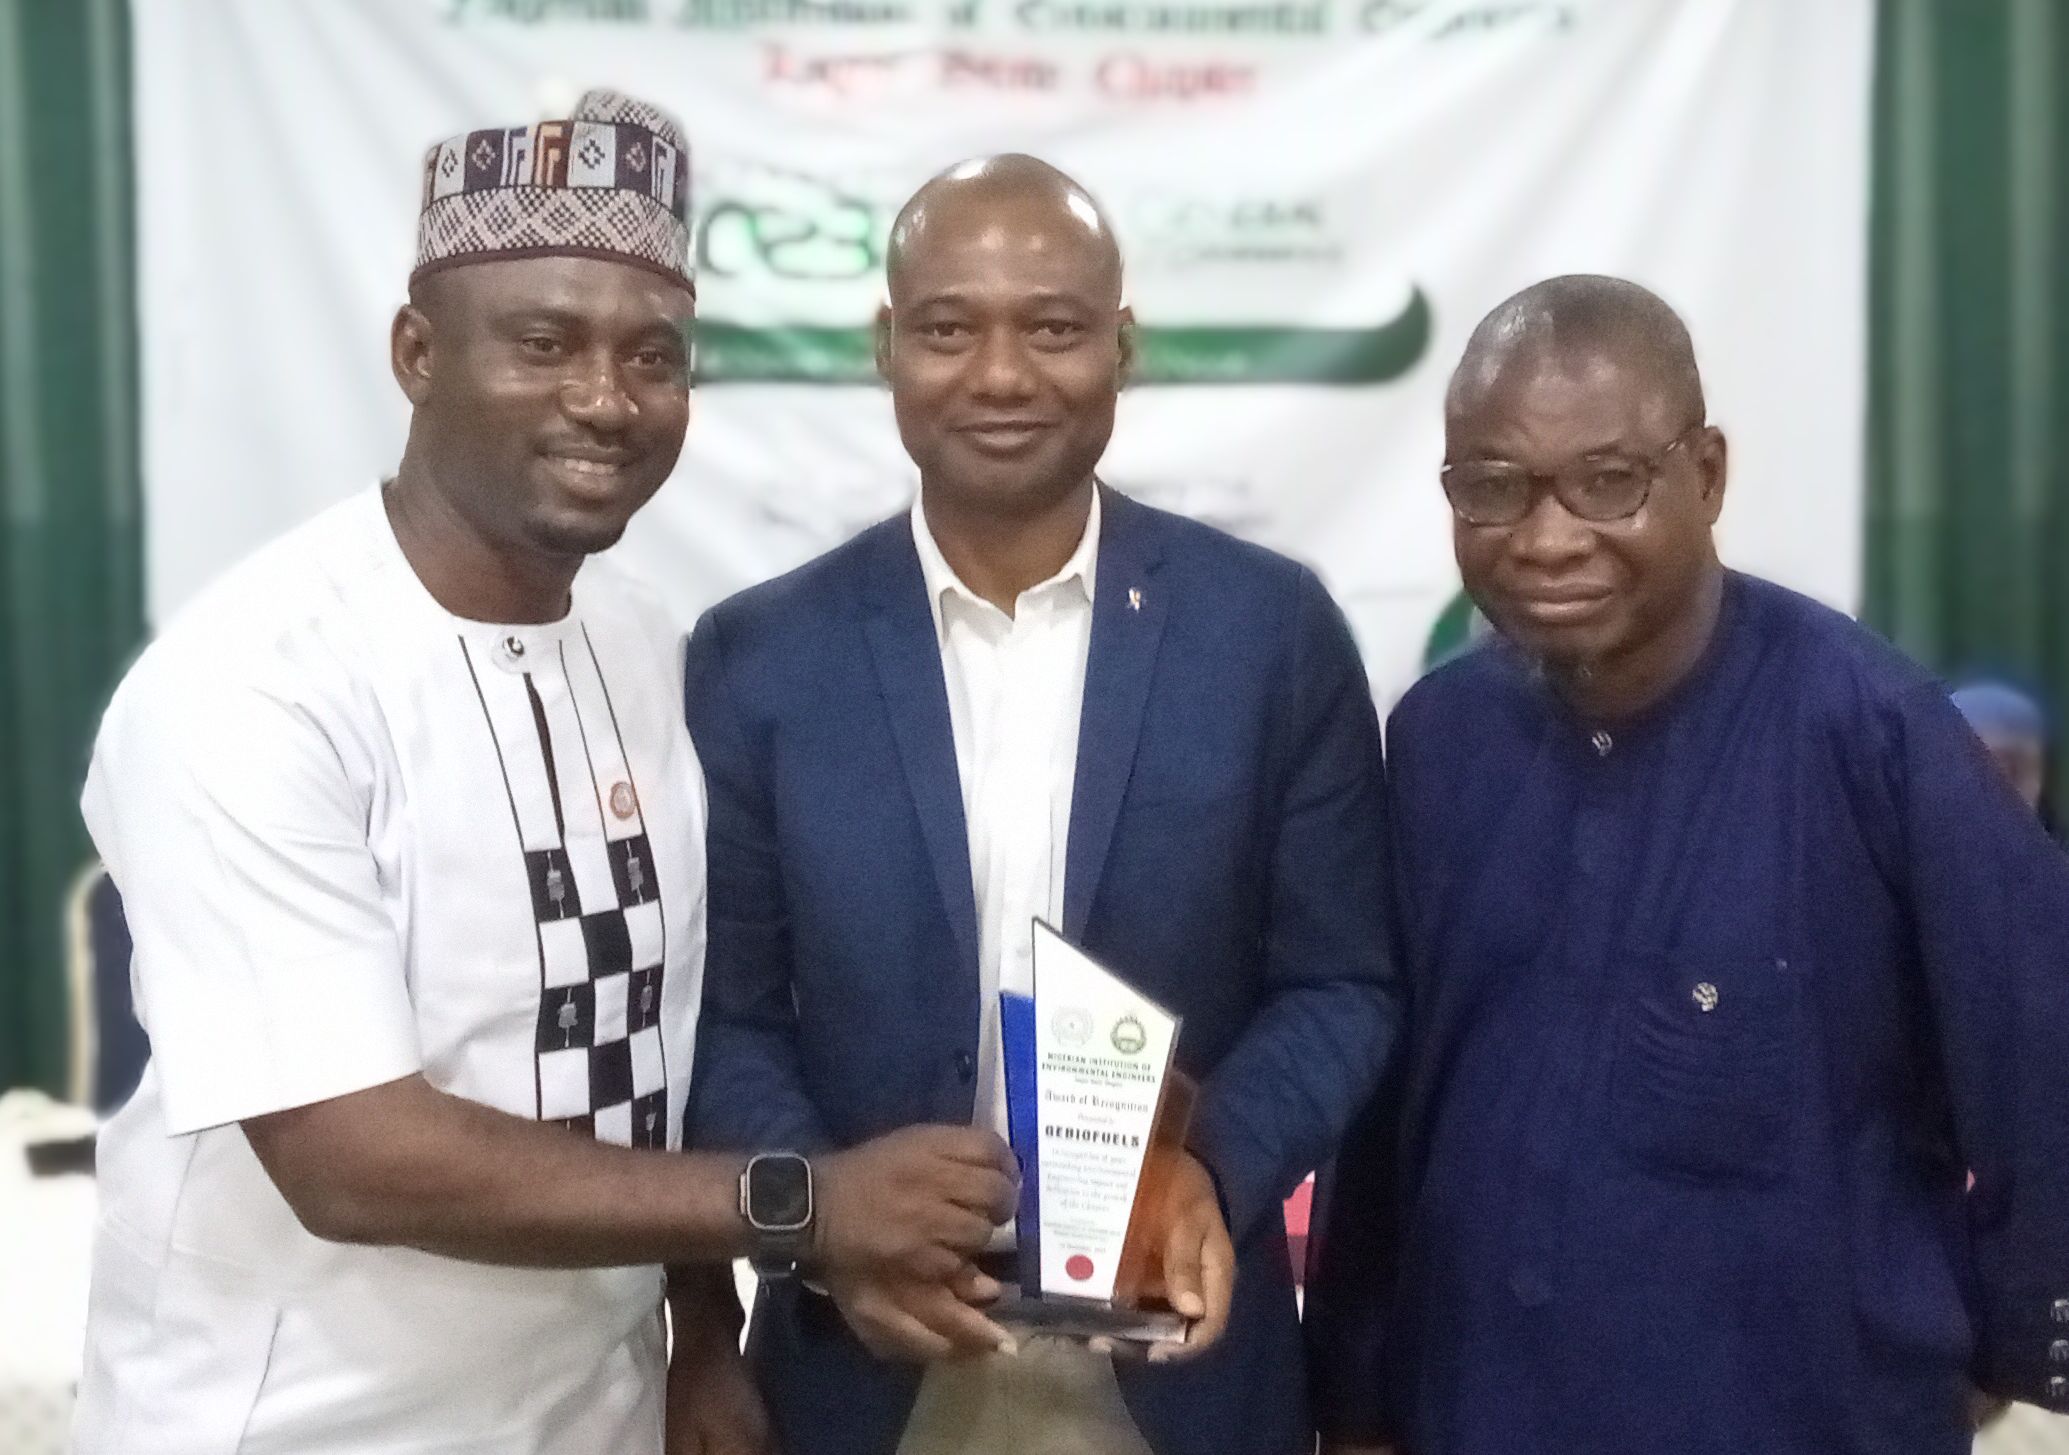 NIEE Lagos to Partner with Green Biofuels on Clean Cooking Stoves